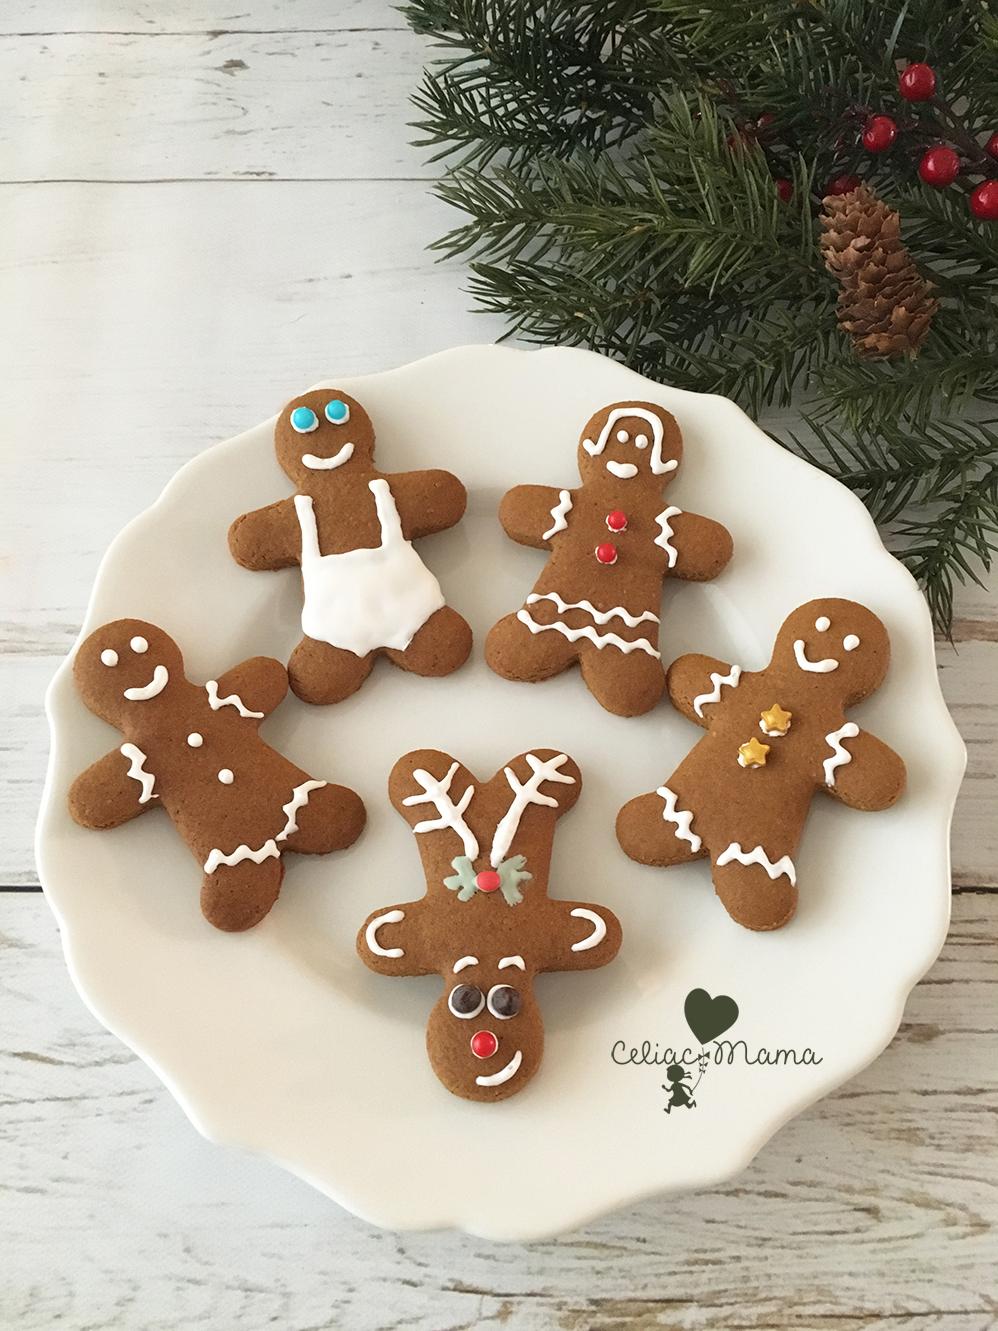  This gingerbread cookie recipe is gluten-free, but no one will even notice because they're so tasty!